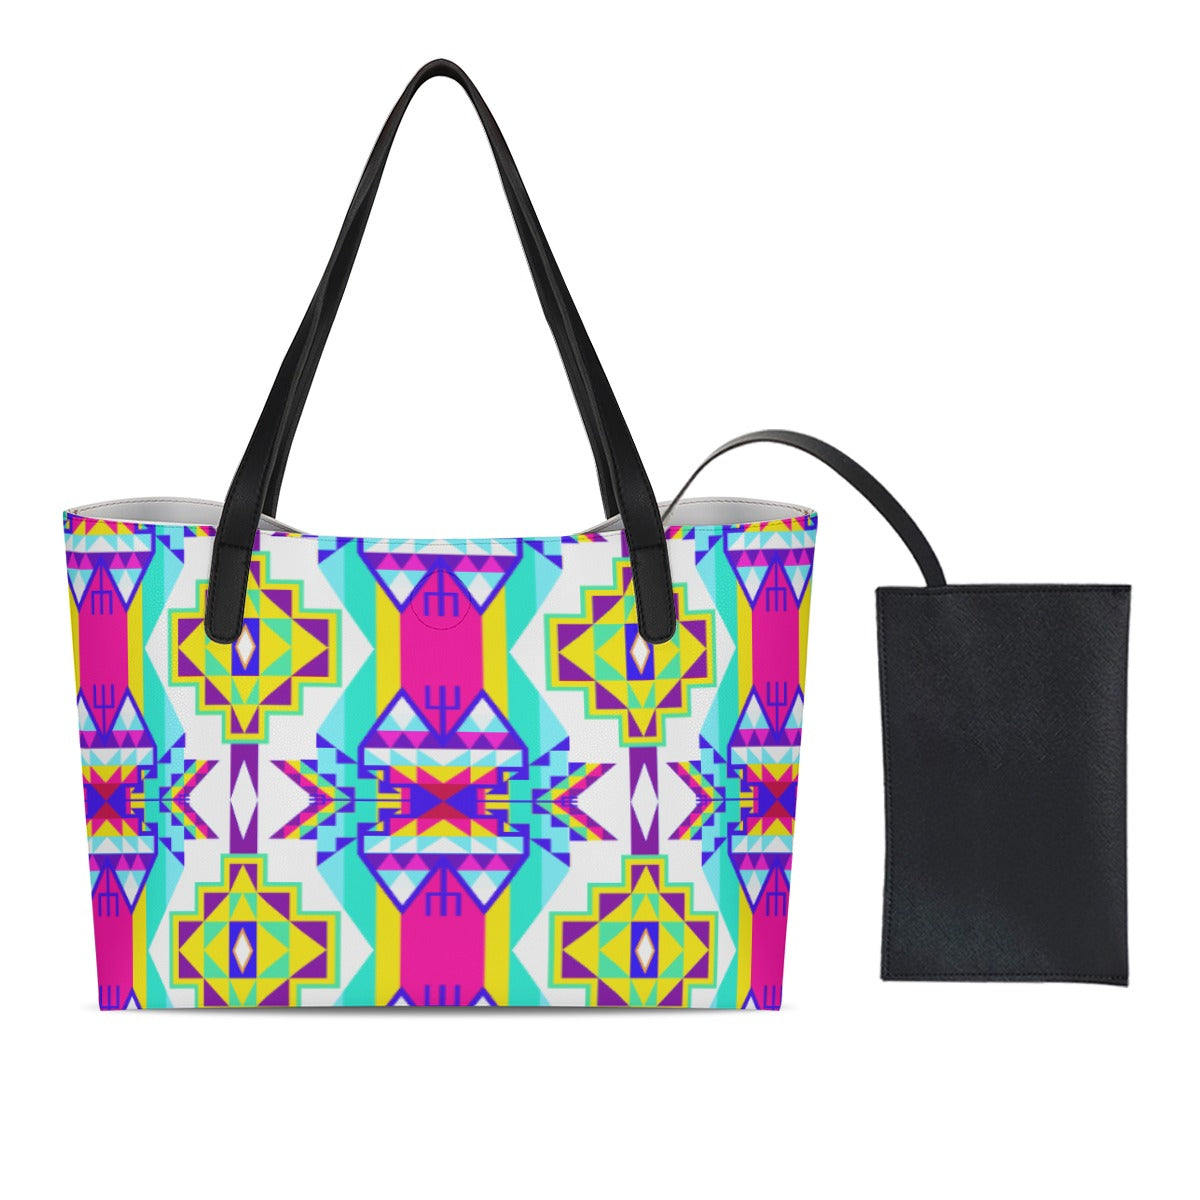 Fancy Champion Shopping Tote Bag With Black Mini Purse